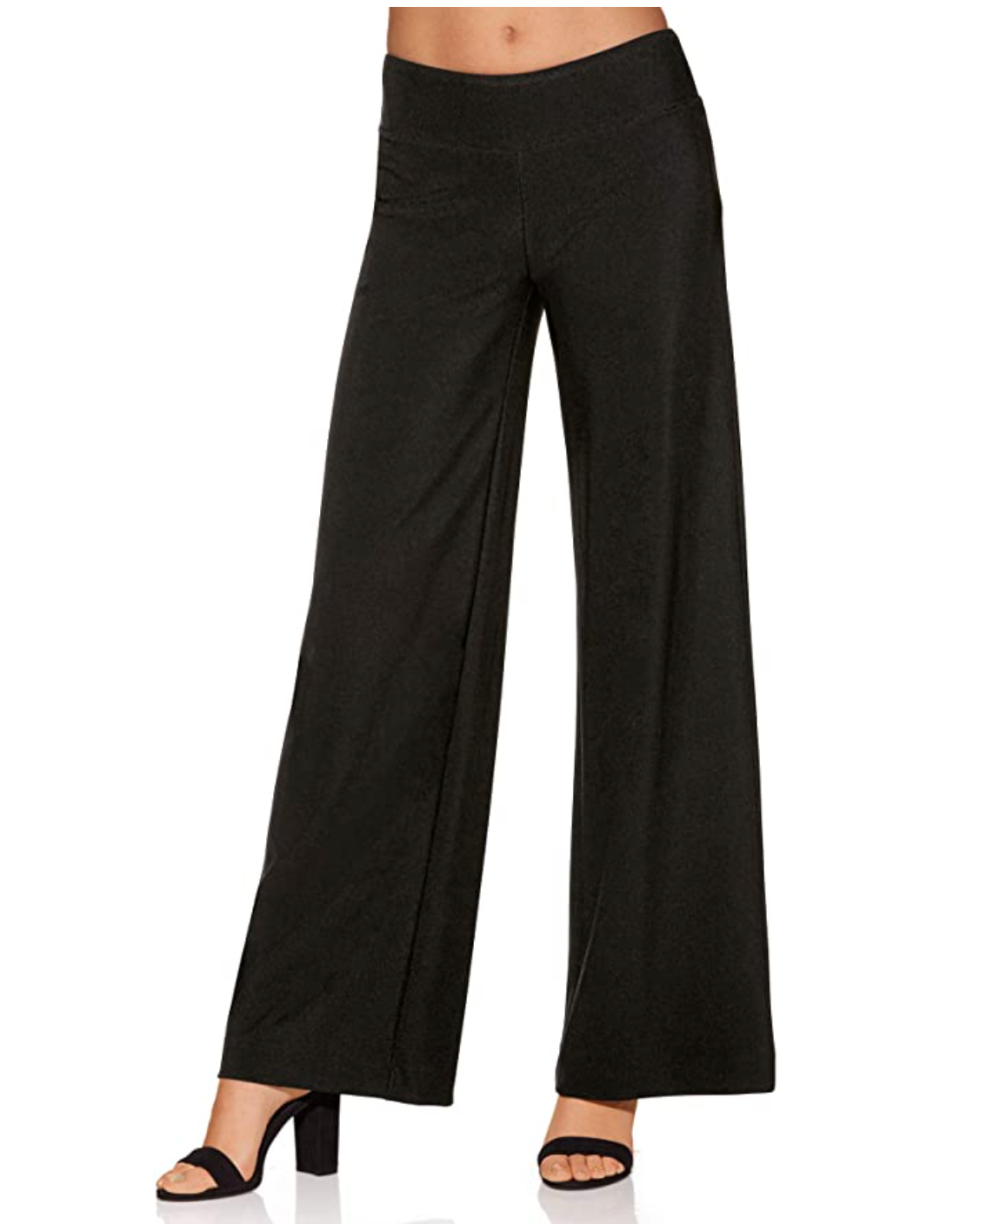 11 Slimming and Leg-Loving Pants to Wear This Fall